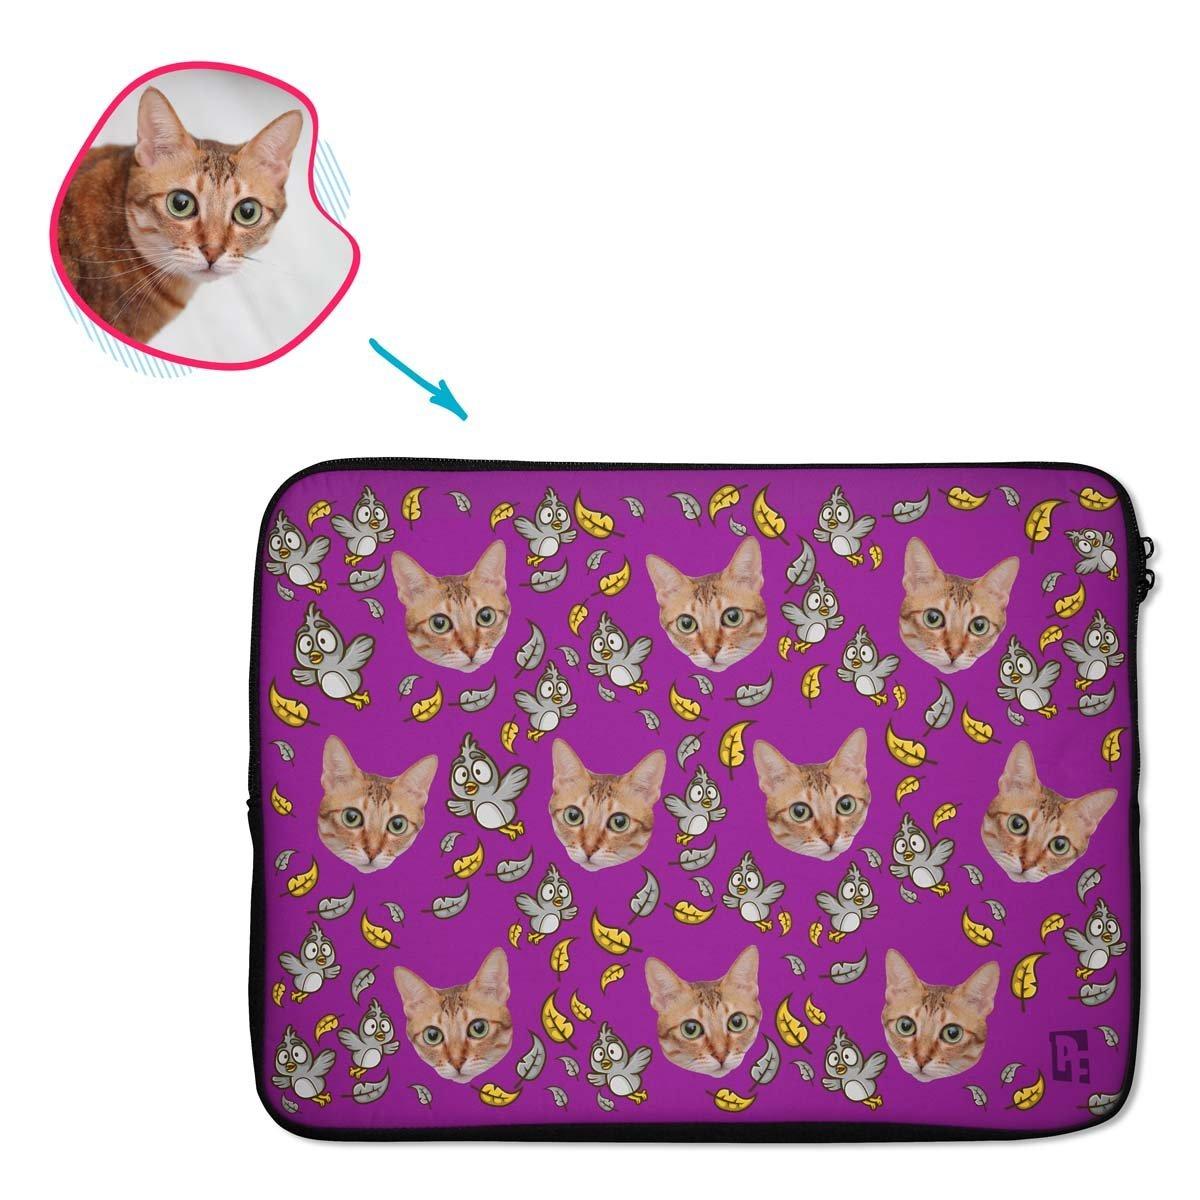 purple Bird laptop sleeve personalized with photo of face printed on them